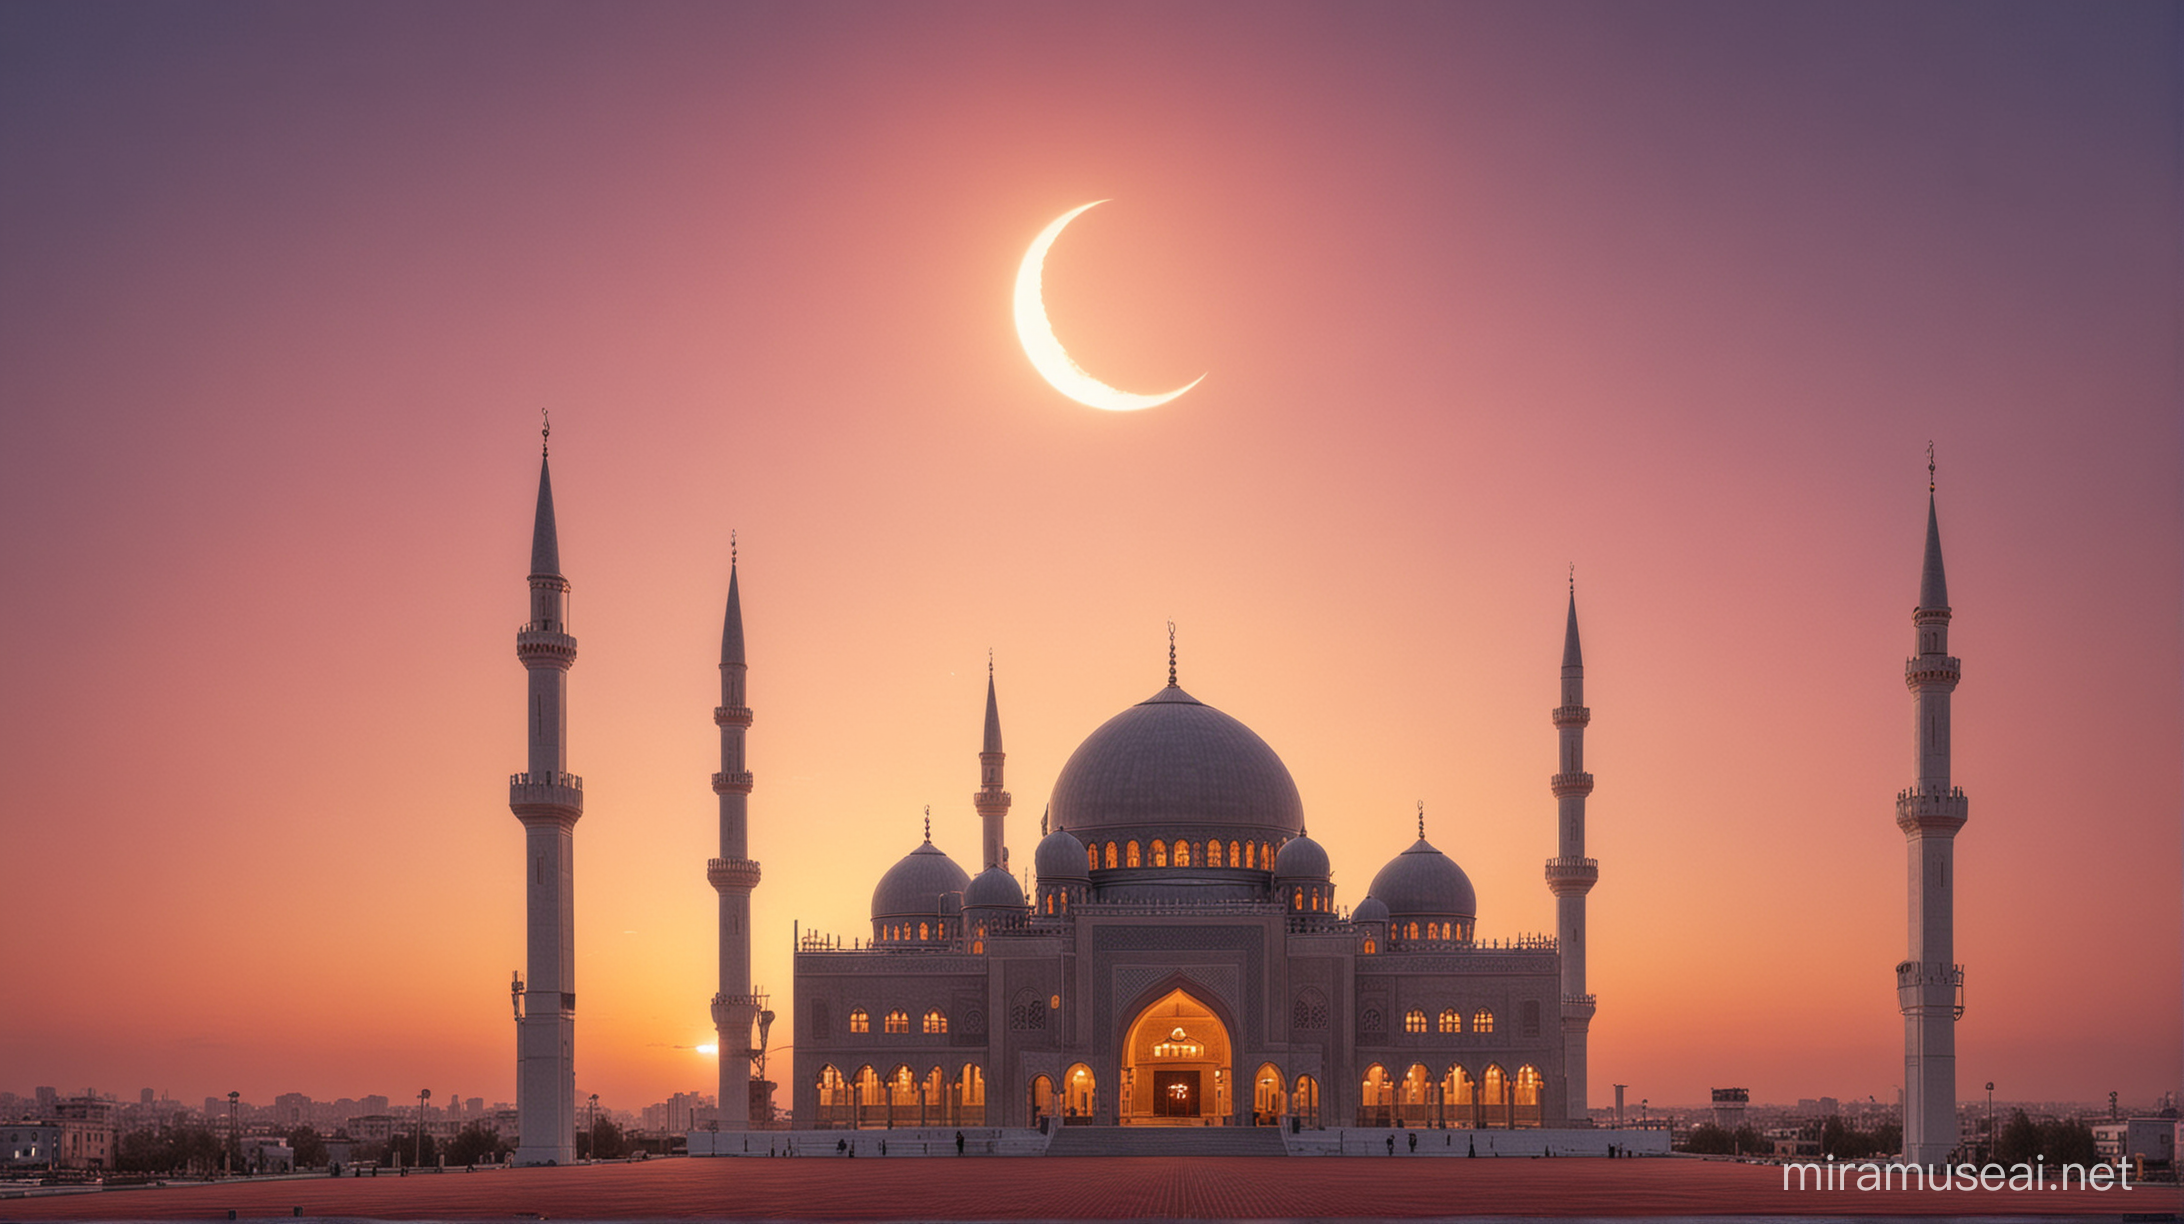 mosque isolated on beautiful warm sky with crescent


